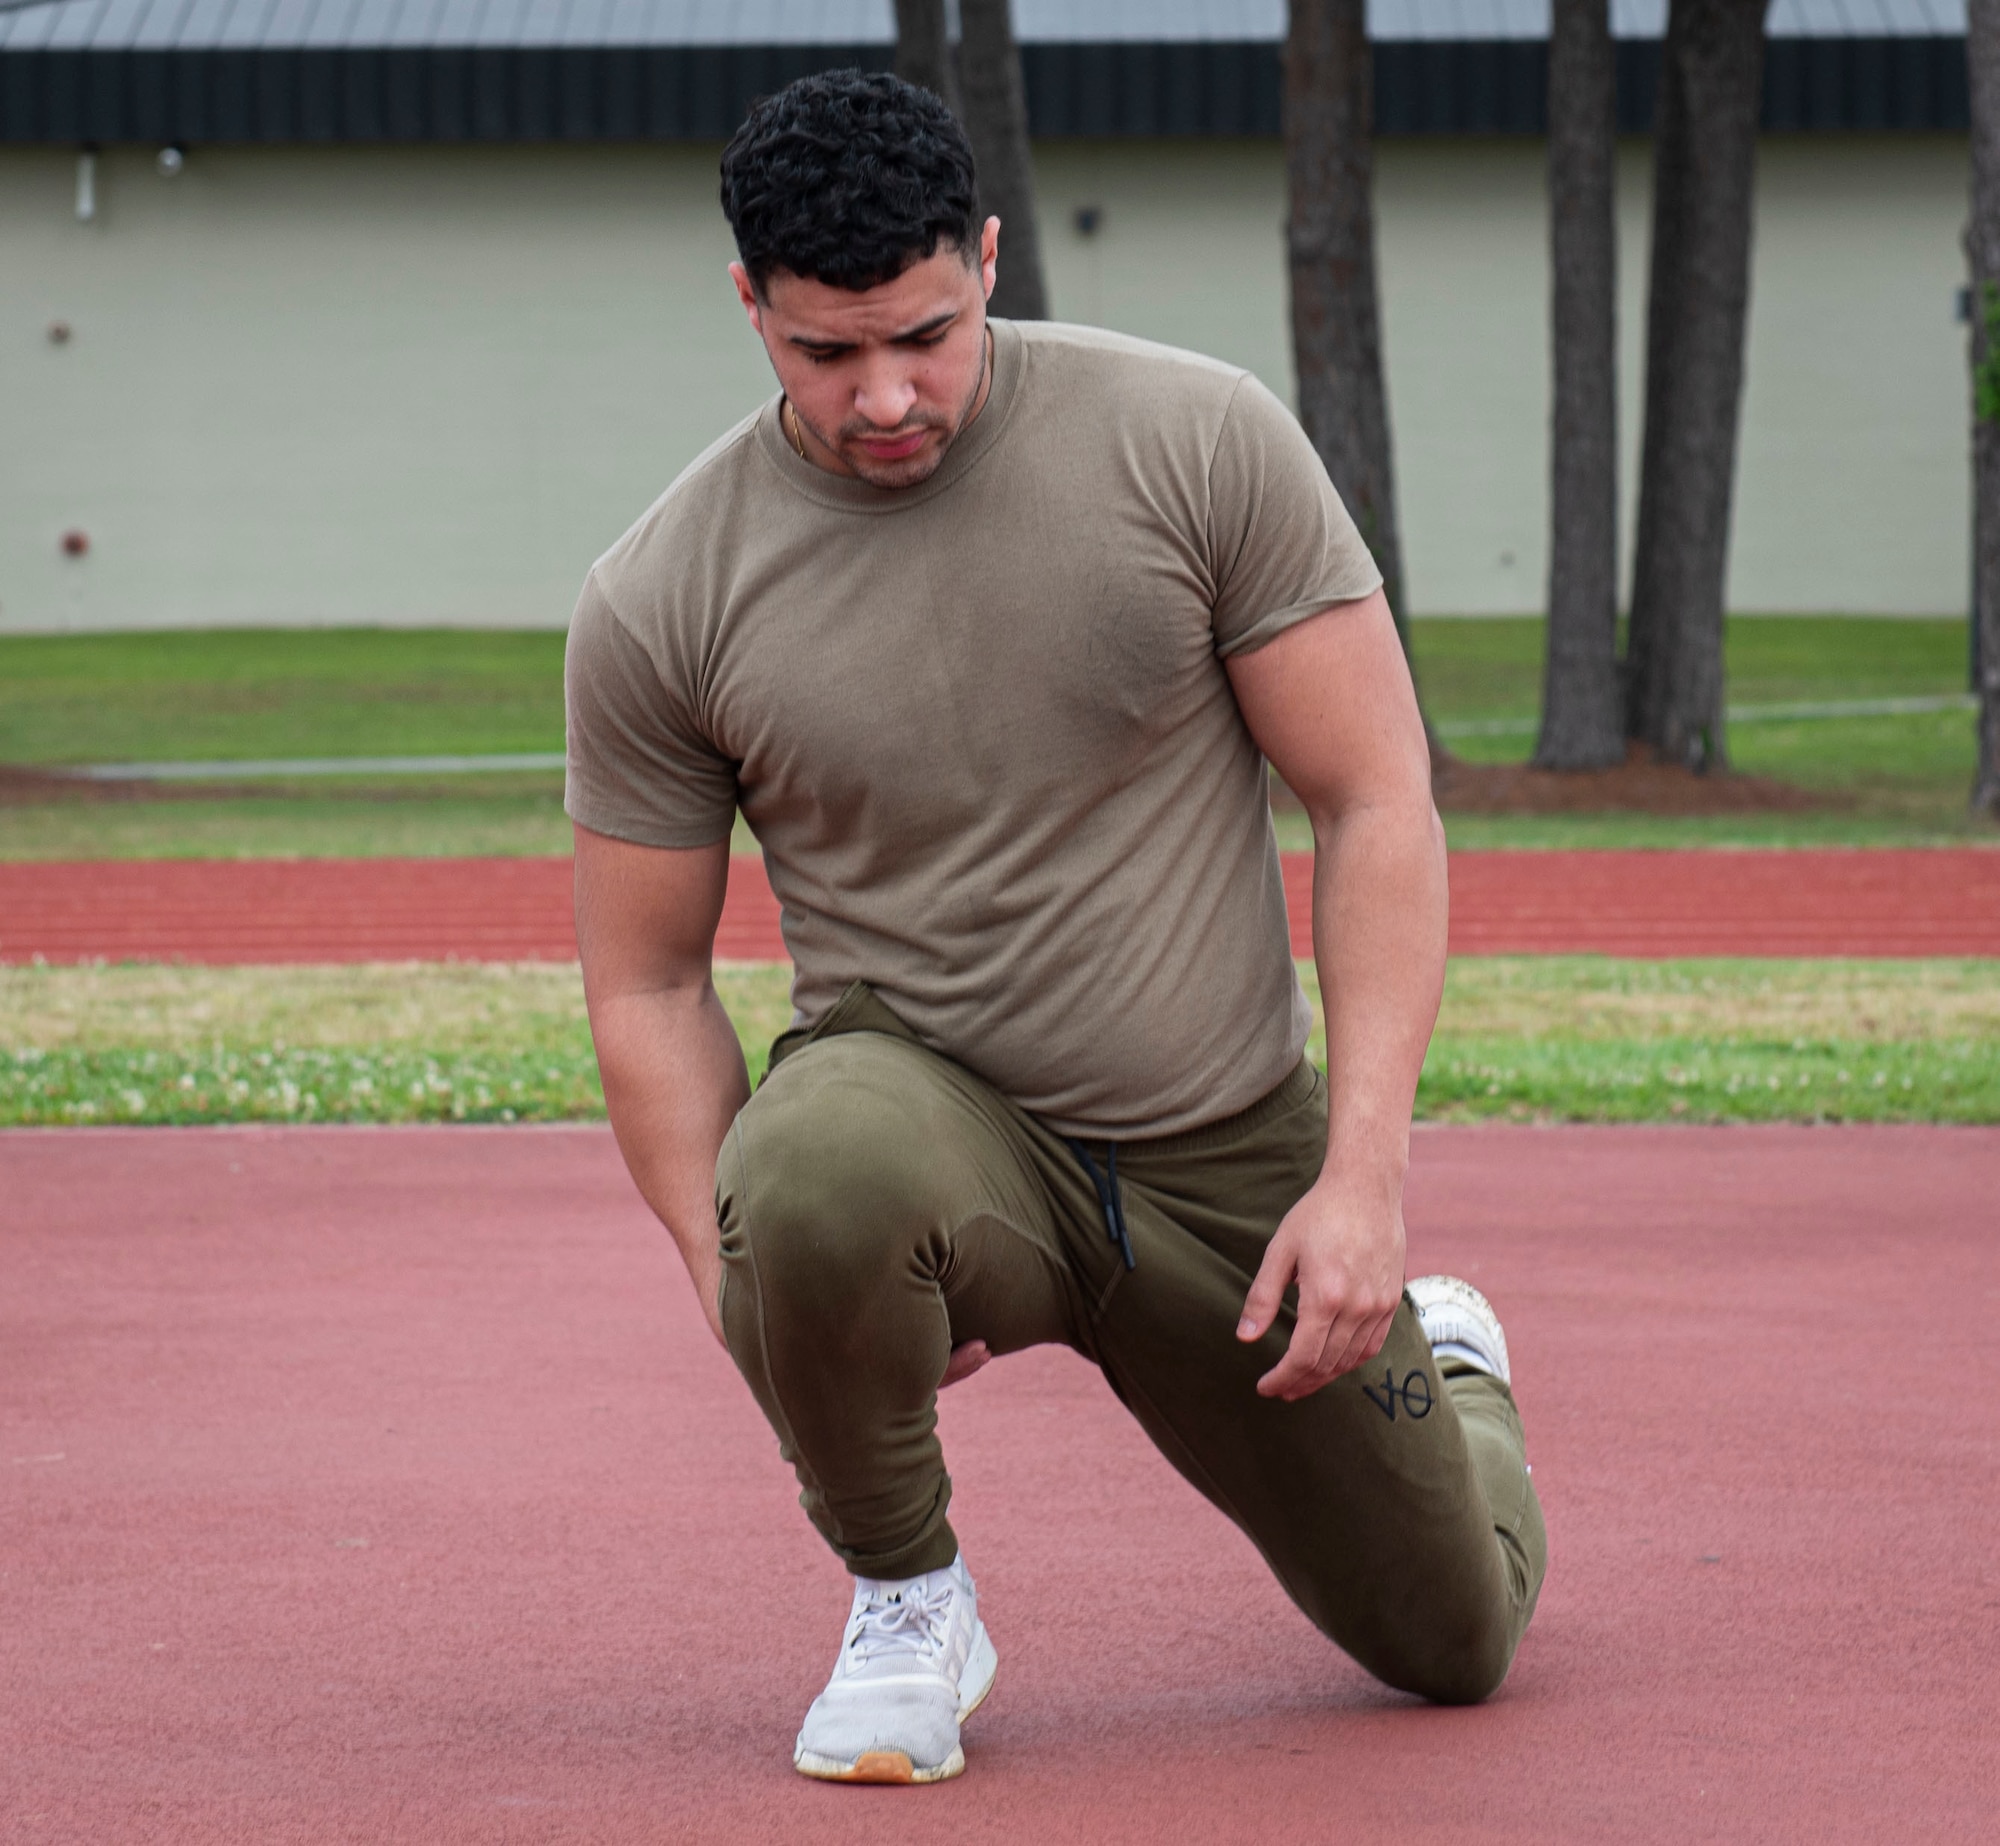 Airman 1st Class Juan Carrasquillo, 334th Fighter Generation Squadron weapons armament system technician, stretches before the start of a Murph Challenge at Seymour Johnson Air Force Base, North Carolina, May 26, 2022. The Murph Challenge was created in memory of Lt. Michael Murphy, U.S. Navy Seal, who was killed in action, but while he was served, he completed this workout to stay physically fit. (U.S. Air Force photo by Airman 1st Class Sabrina Fuller)